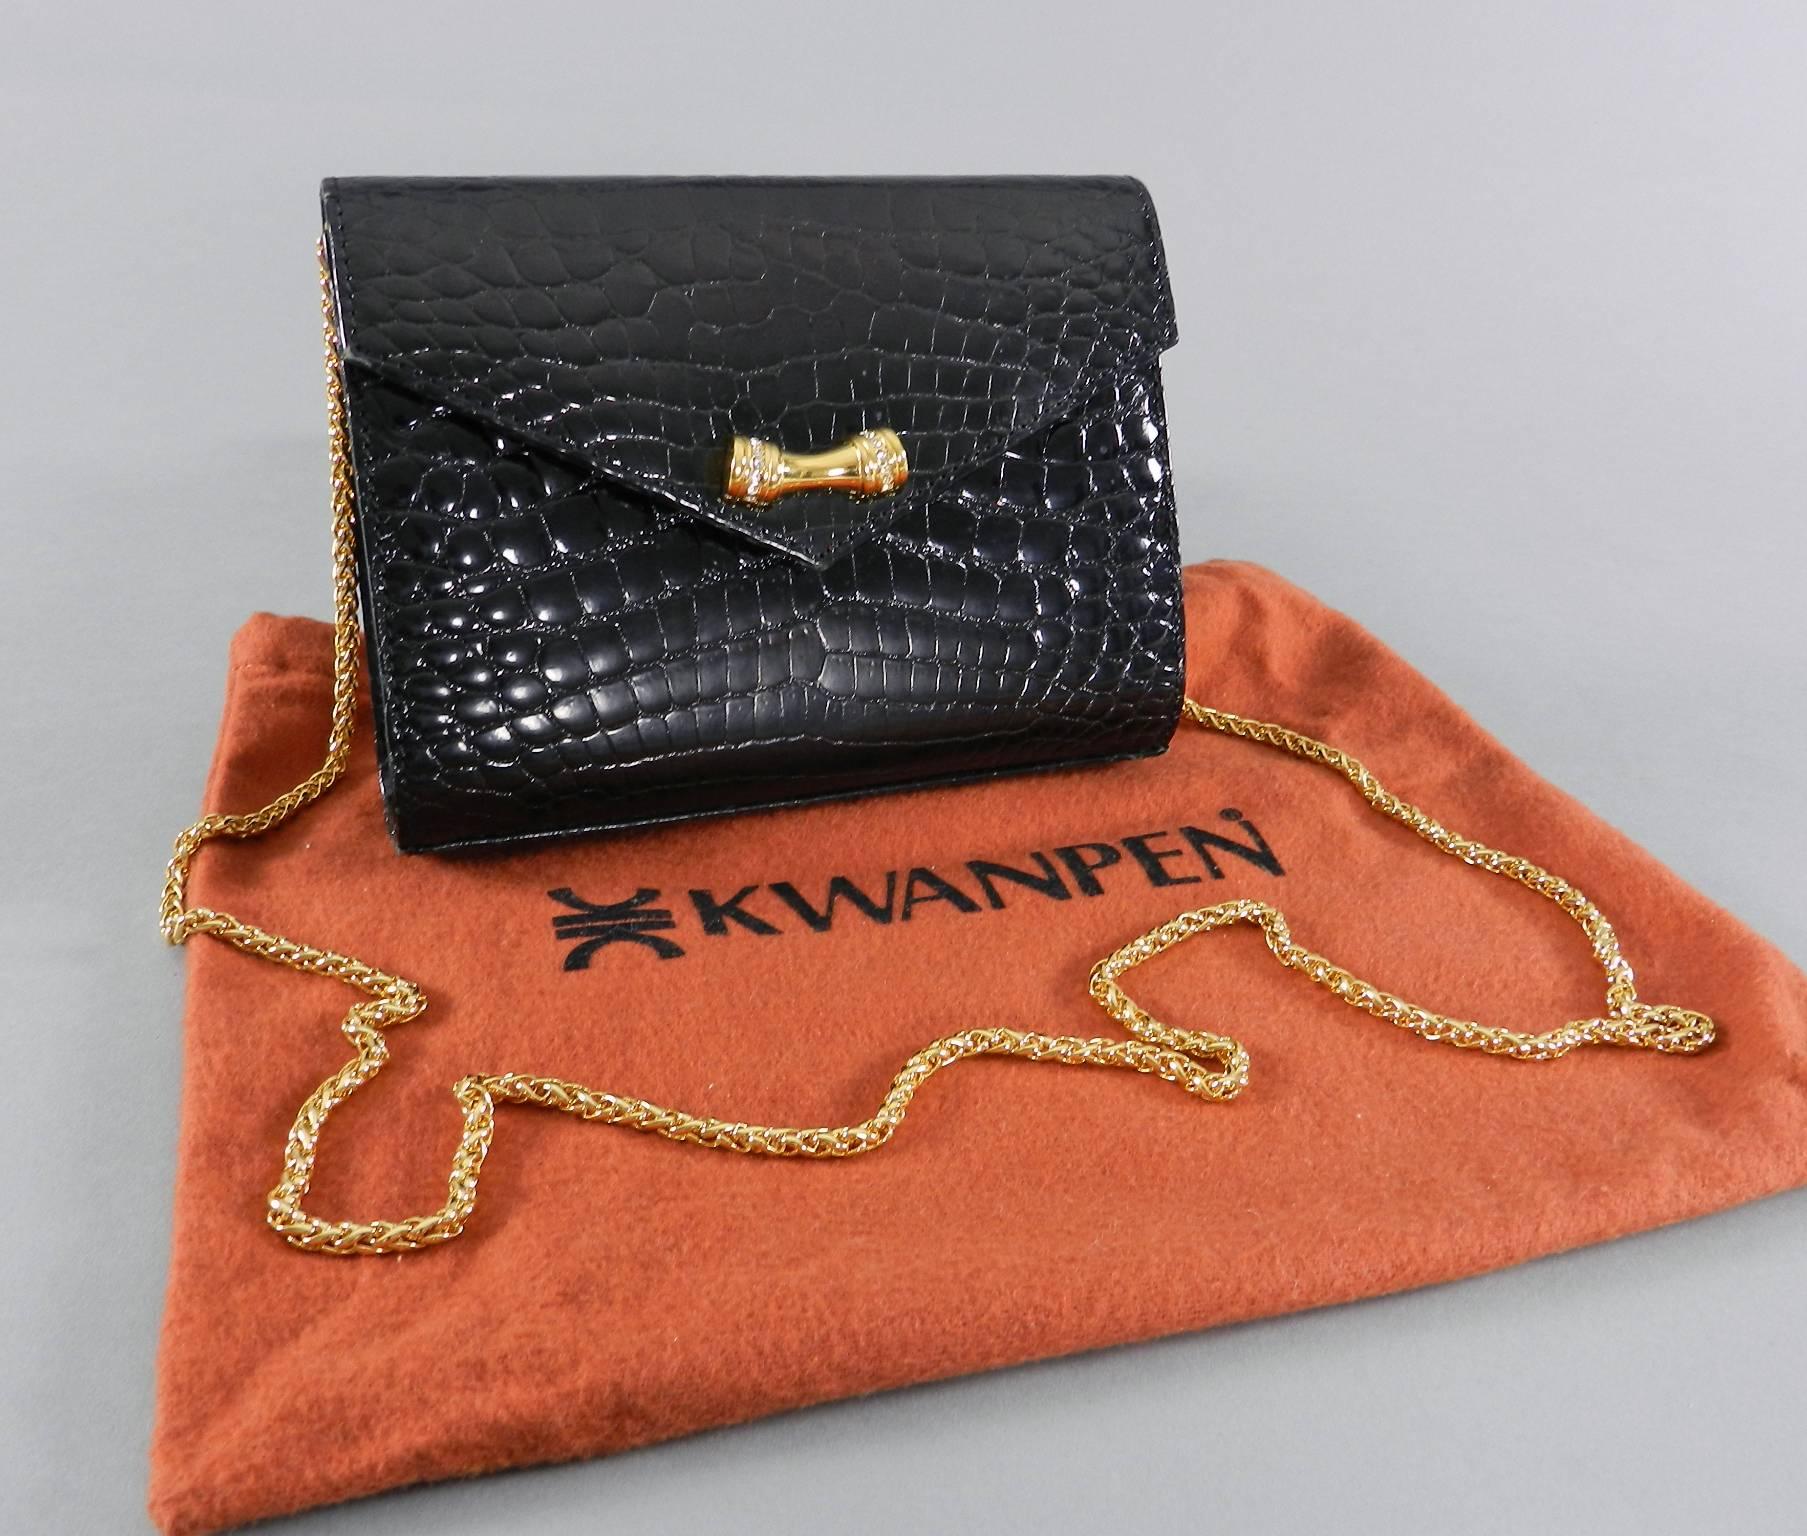 Kwanpen small black crocodile evening bag.  From Singapore based luxury bag label specializing in crocodile bags since 1938. Goldtone metal bow detail and chain strap that can be tucked inside when worn as clutch. Bag measures 6.75 x 5 x 1.75